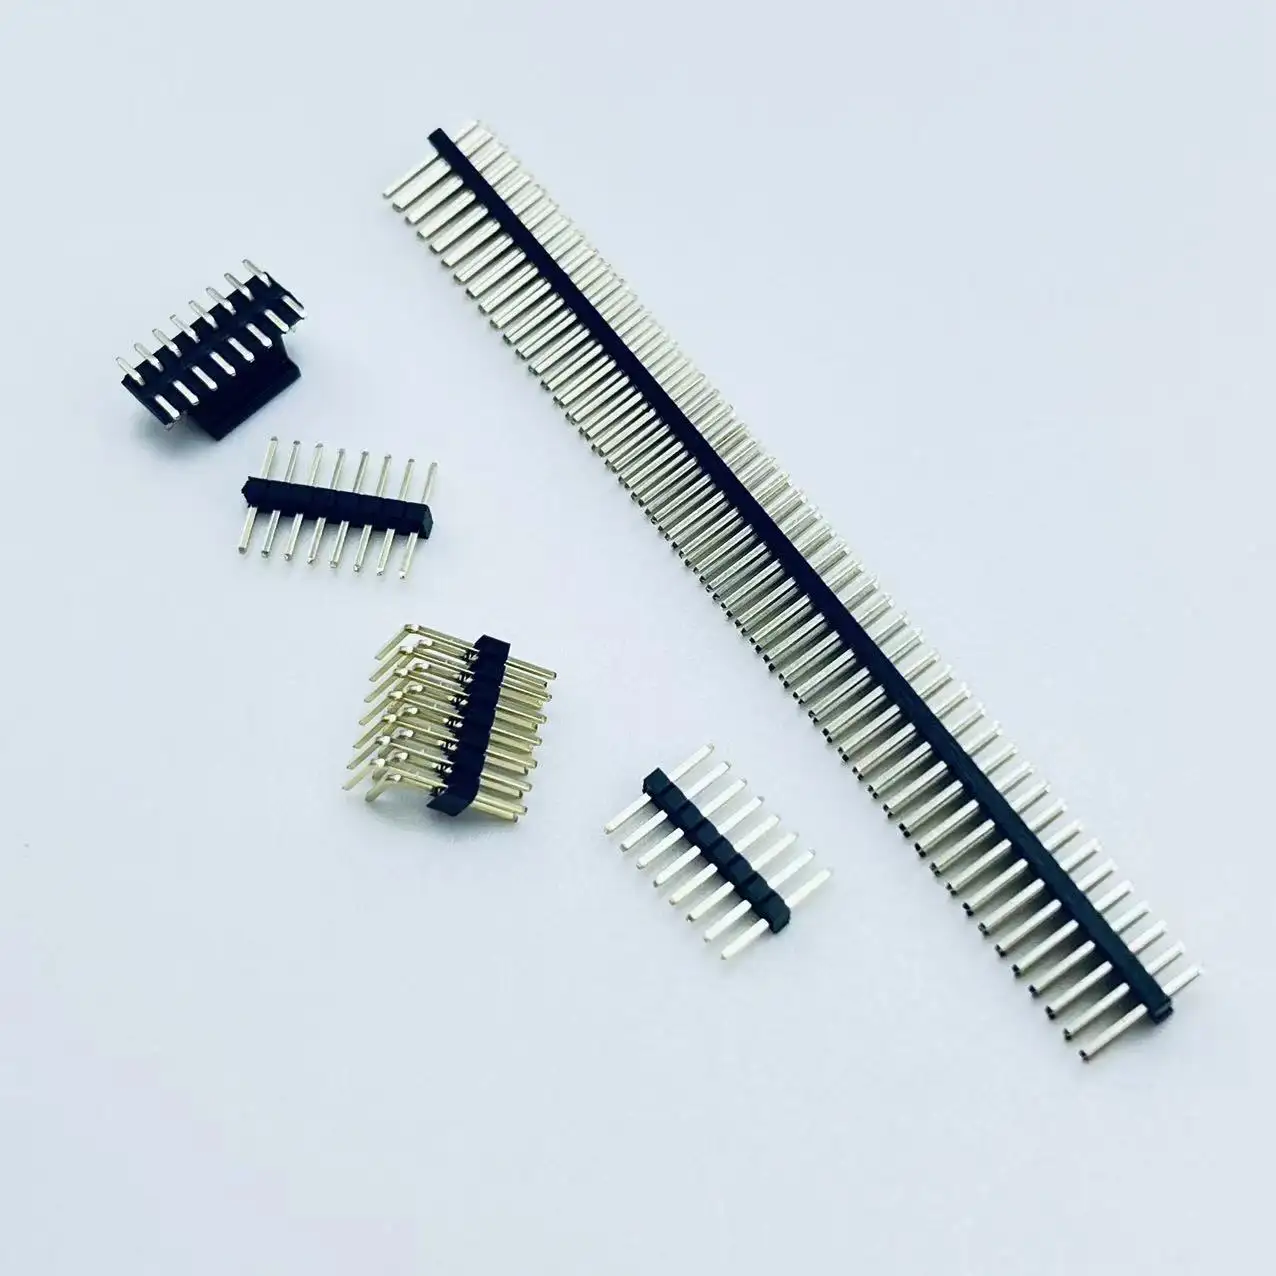 2023 New Style 1.0mm pitch pin header SMT adapters   connectors for pcb board